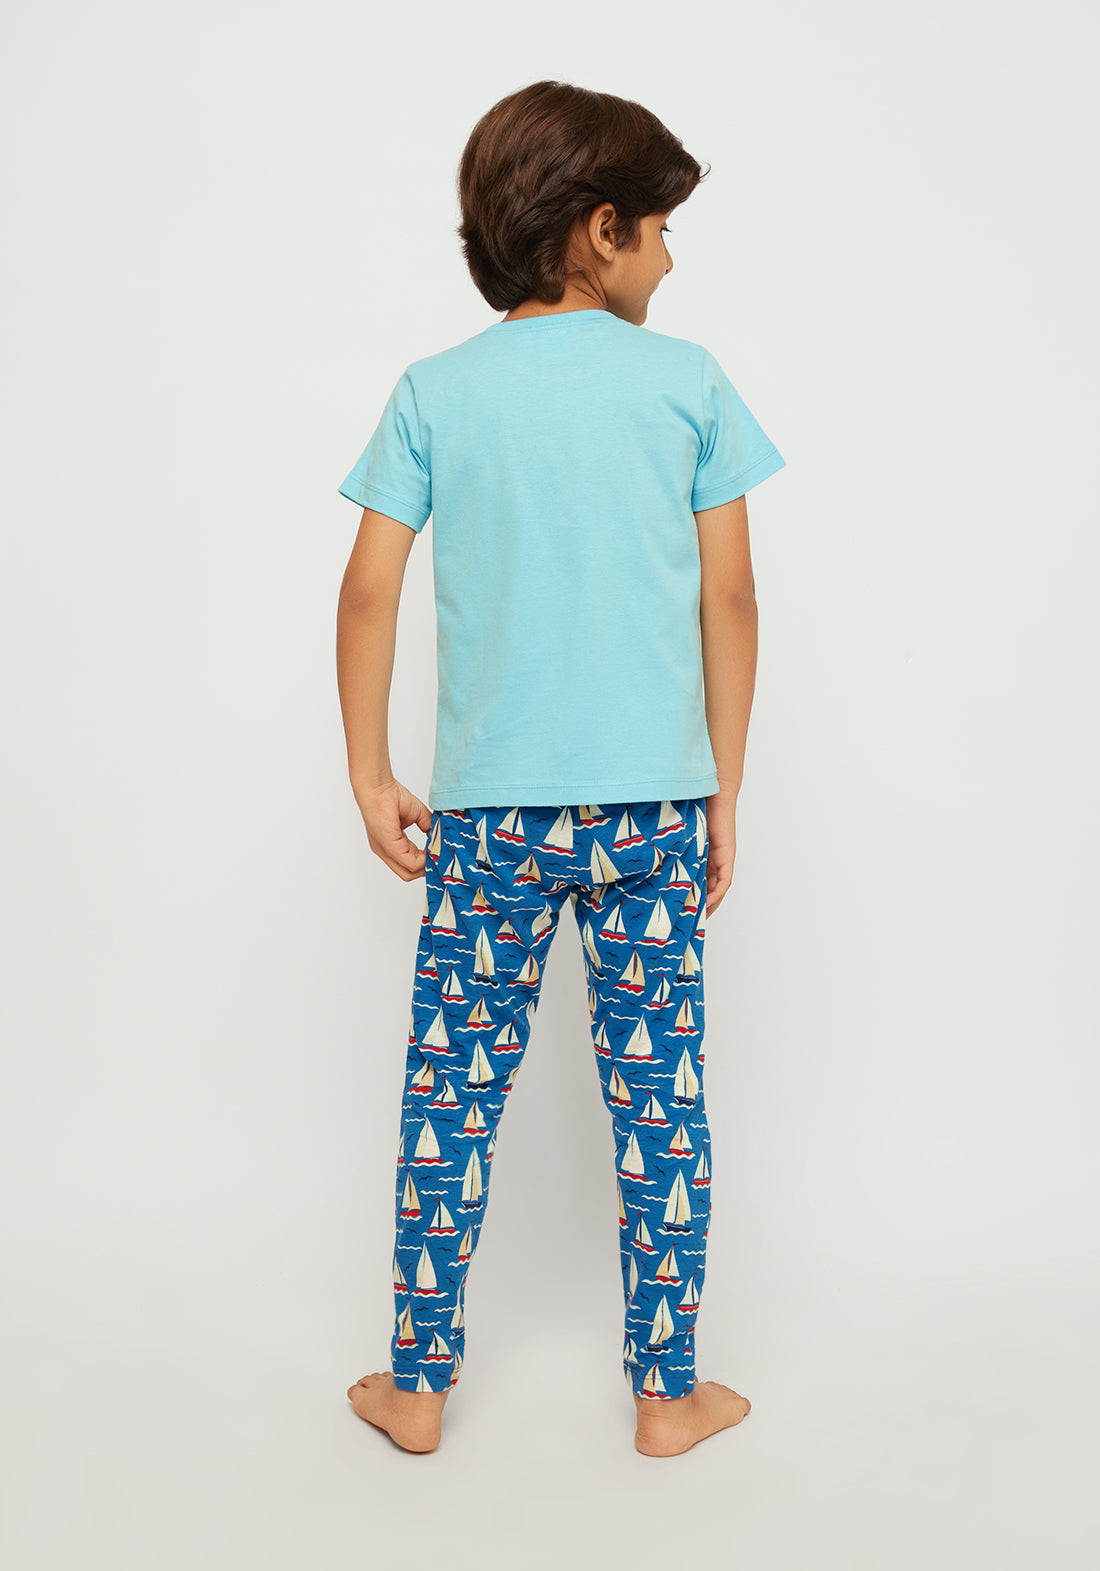 RED, BLUE AND WHITE BOAT PRINT SHORT SLEEVE PAJAMA SET